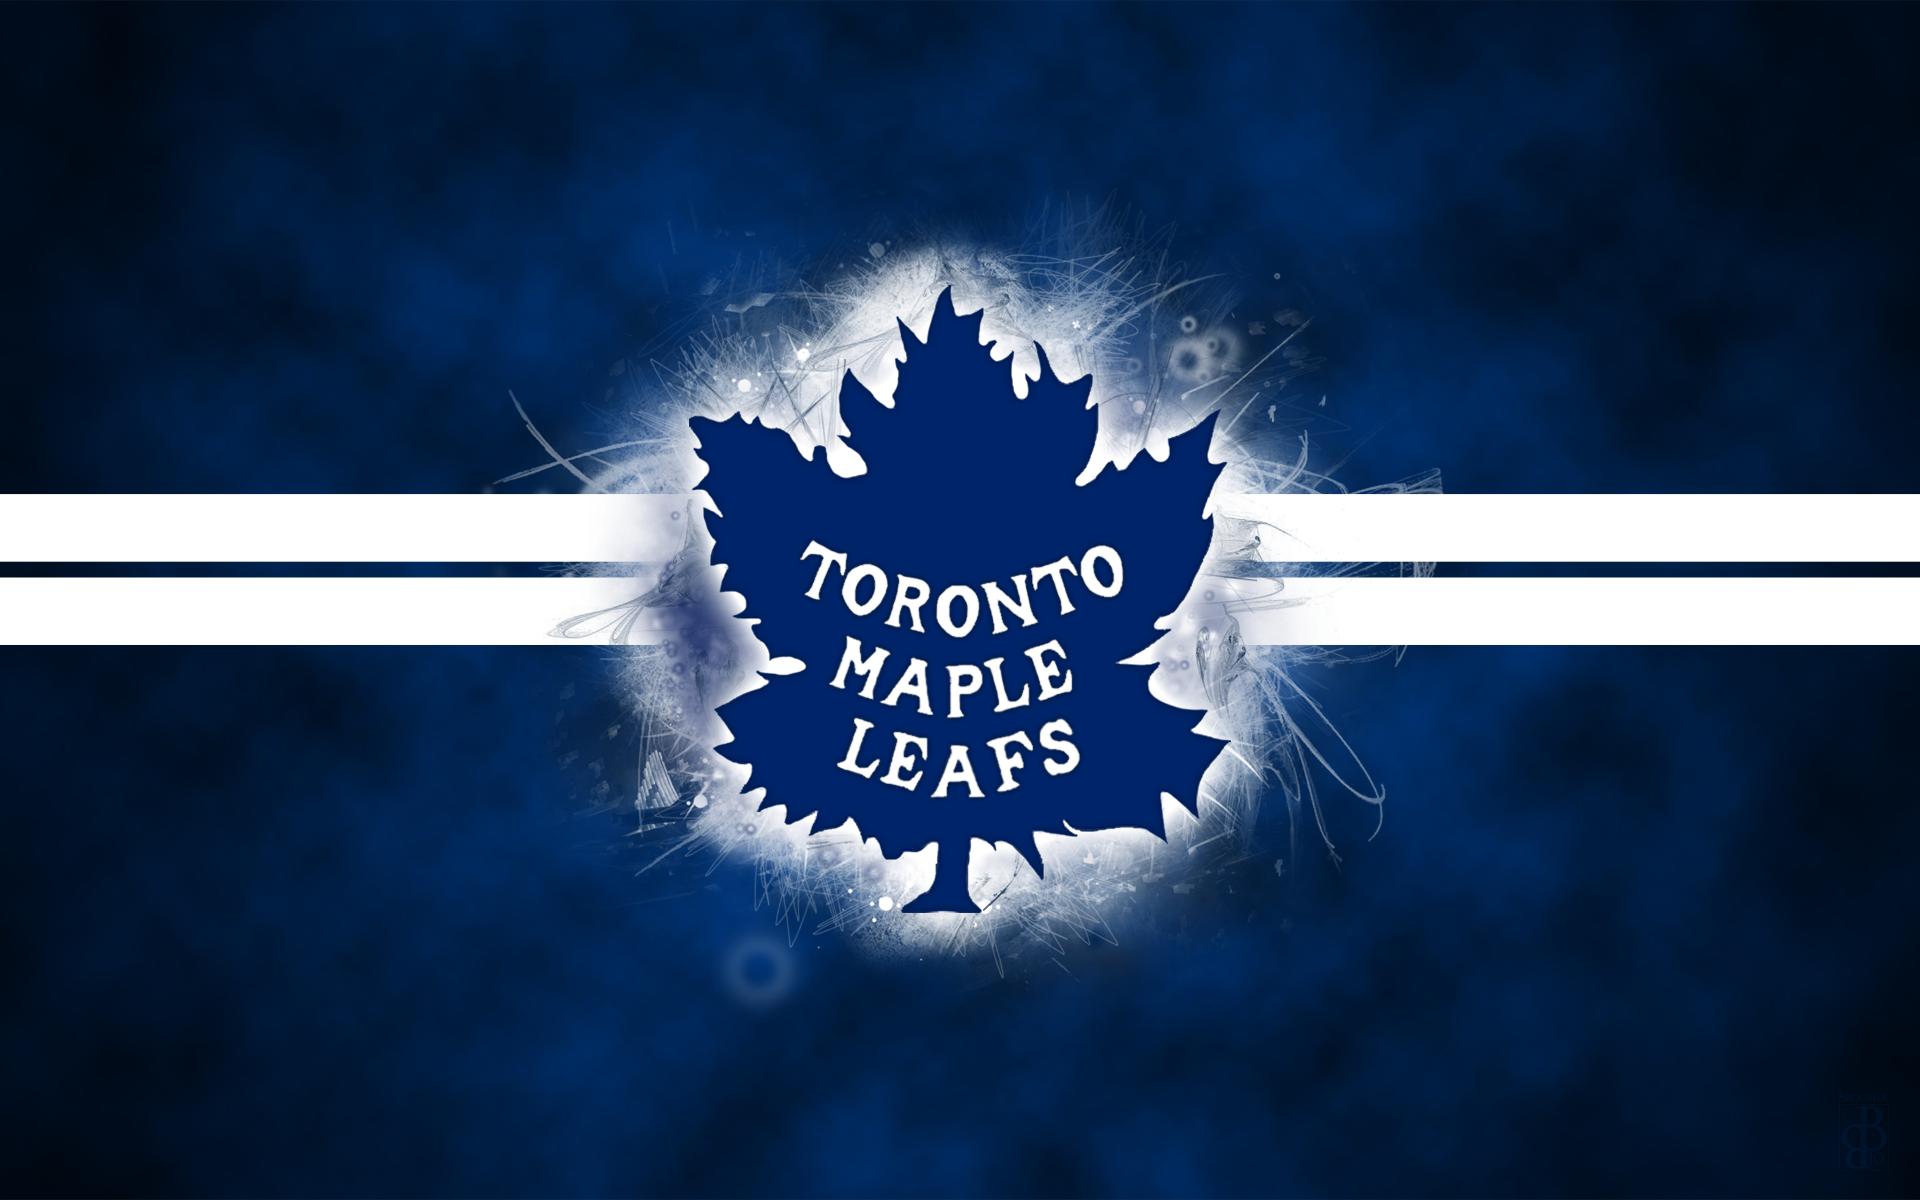 Toronto Maple Leafs Backgrounds